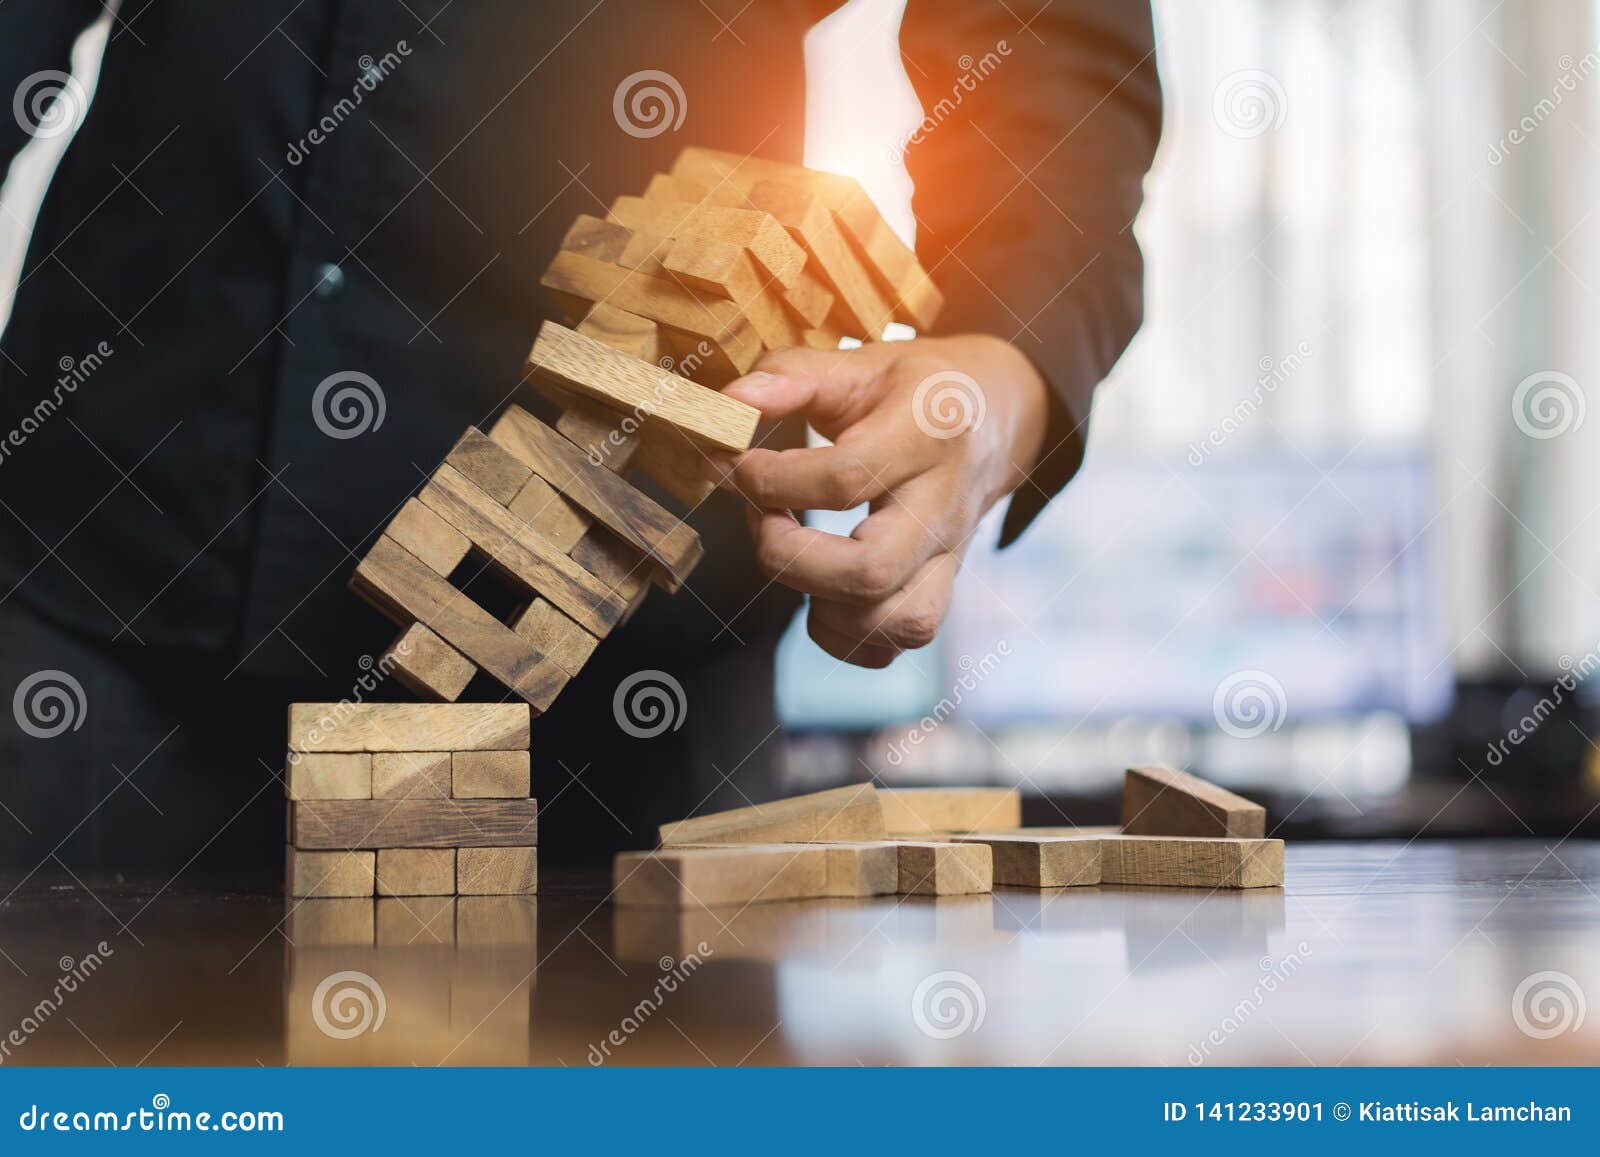 hand of businessman pulling wood block fail on building